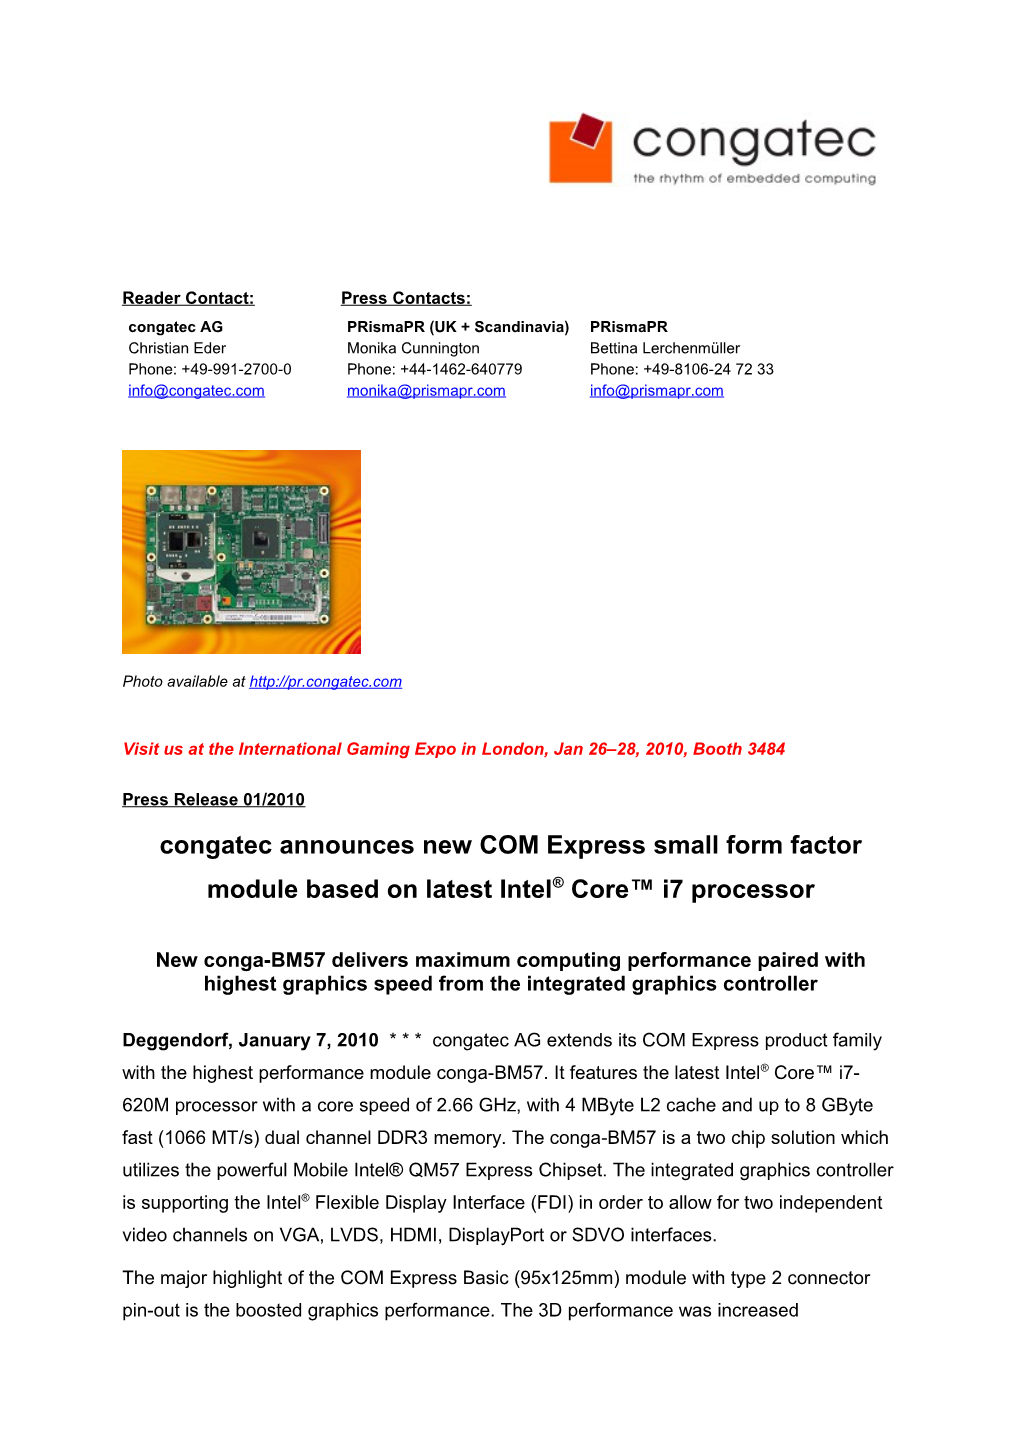 Congatec Announces New COM Express Small Form Factor Module Based on Latest Intel Core